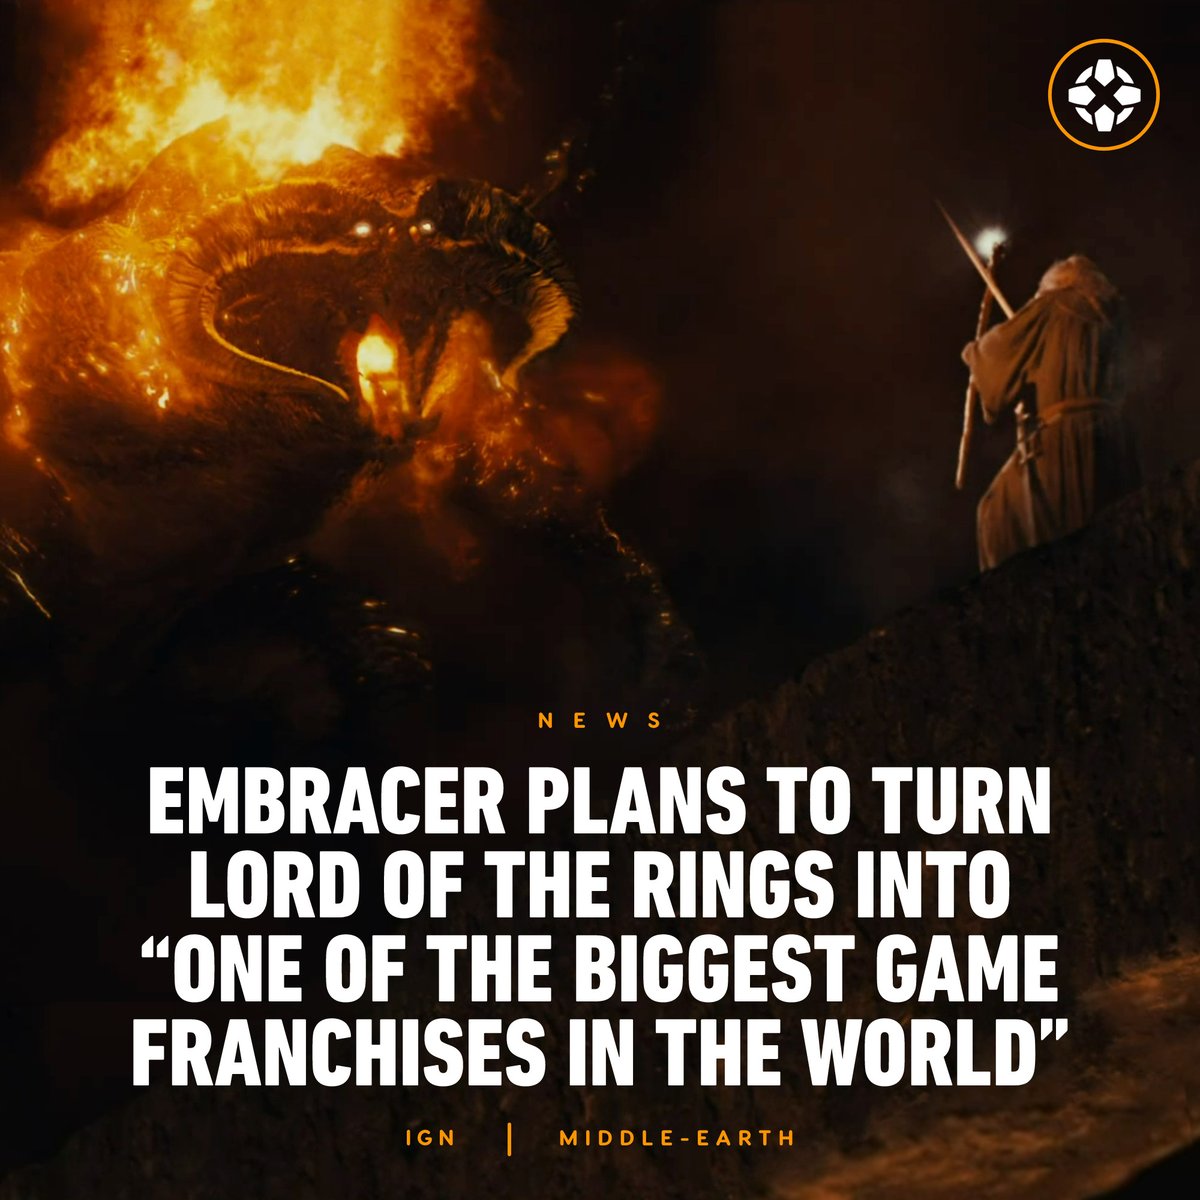 Following news of a restructuring, Embracer executives made it clear that The Lord of the Rings franchise will be a priority moving forward. 'We know we need to be exploiting Lord of the Rings in a very significant fashion.' bit.ly/43zUl8A